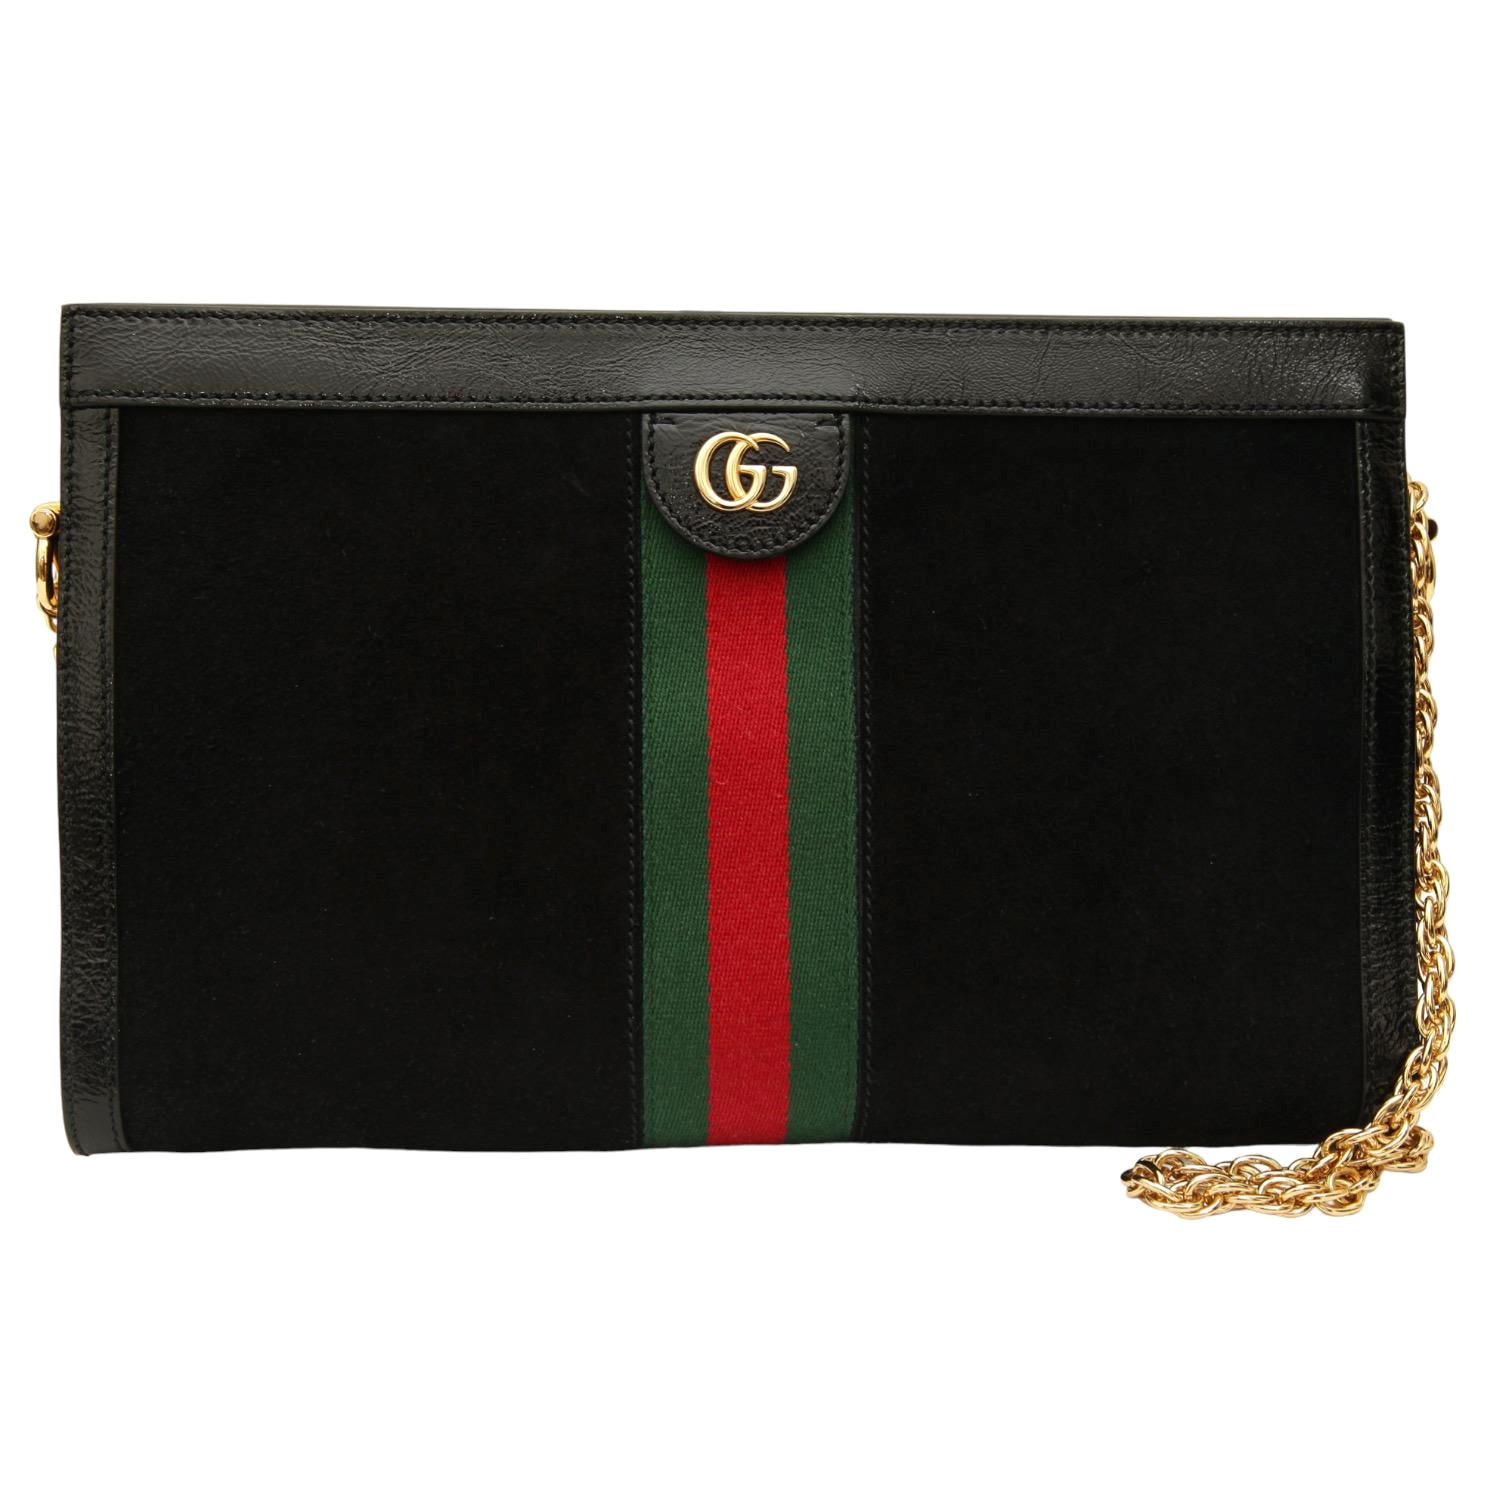 Gucci Ophidia Medium Tote Bag Black Leather with Gold-Toned